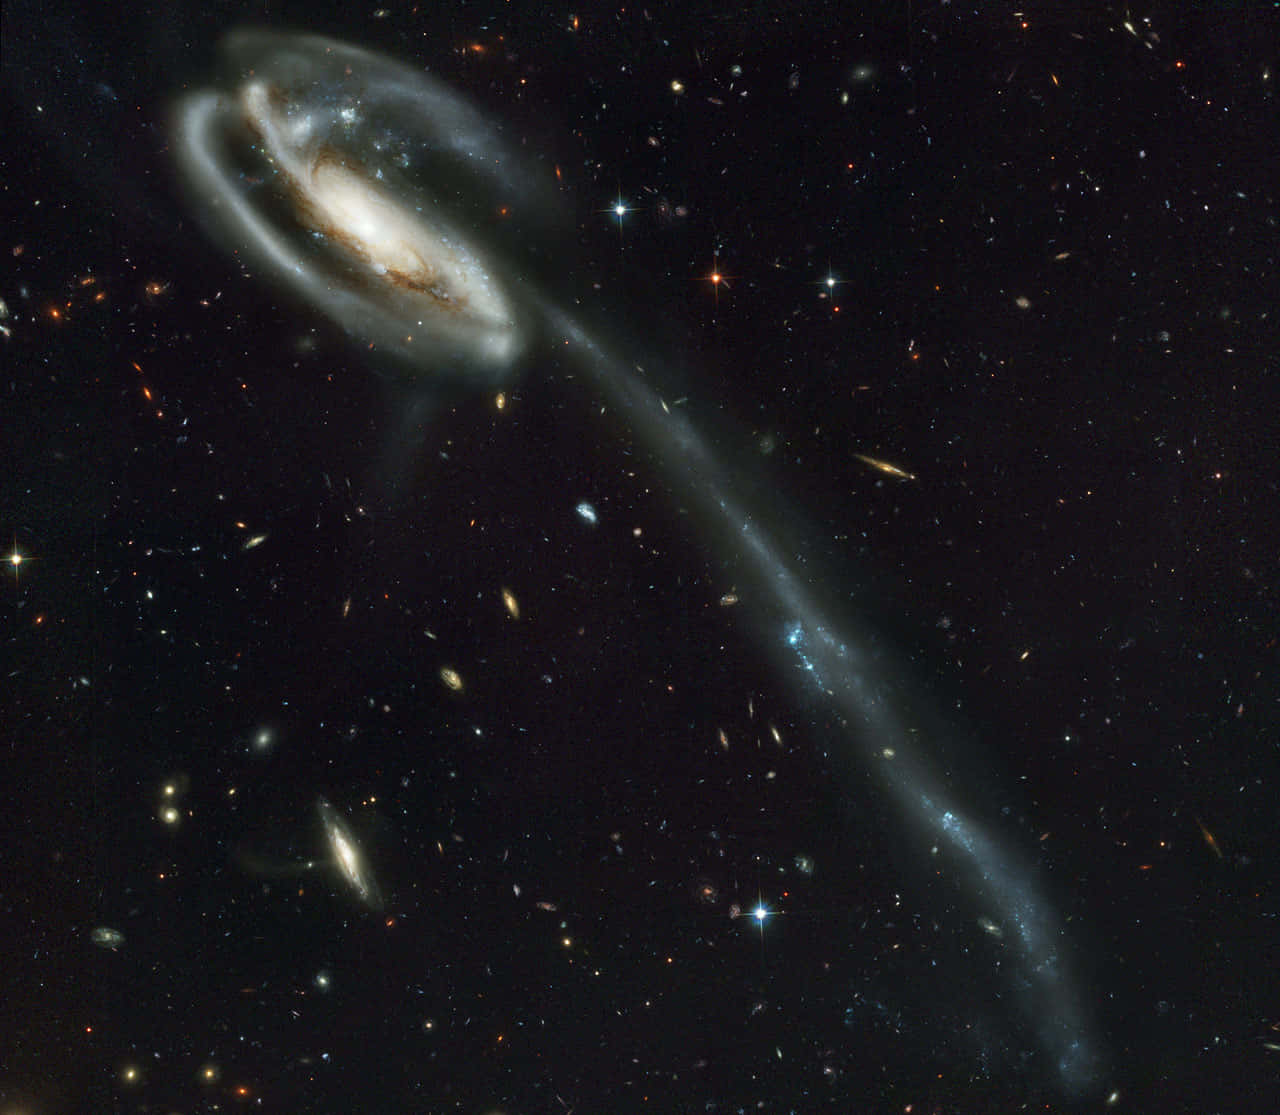 Marvel at the wonders of the universe with this stunning NASA galaxy picture